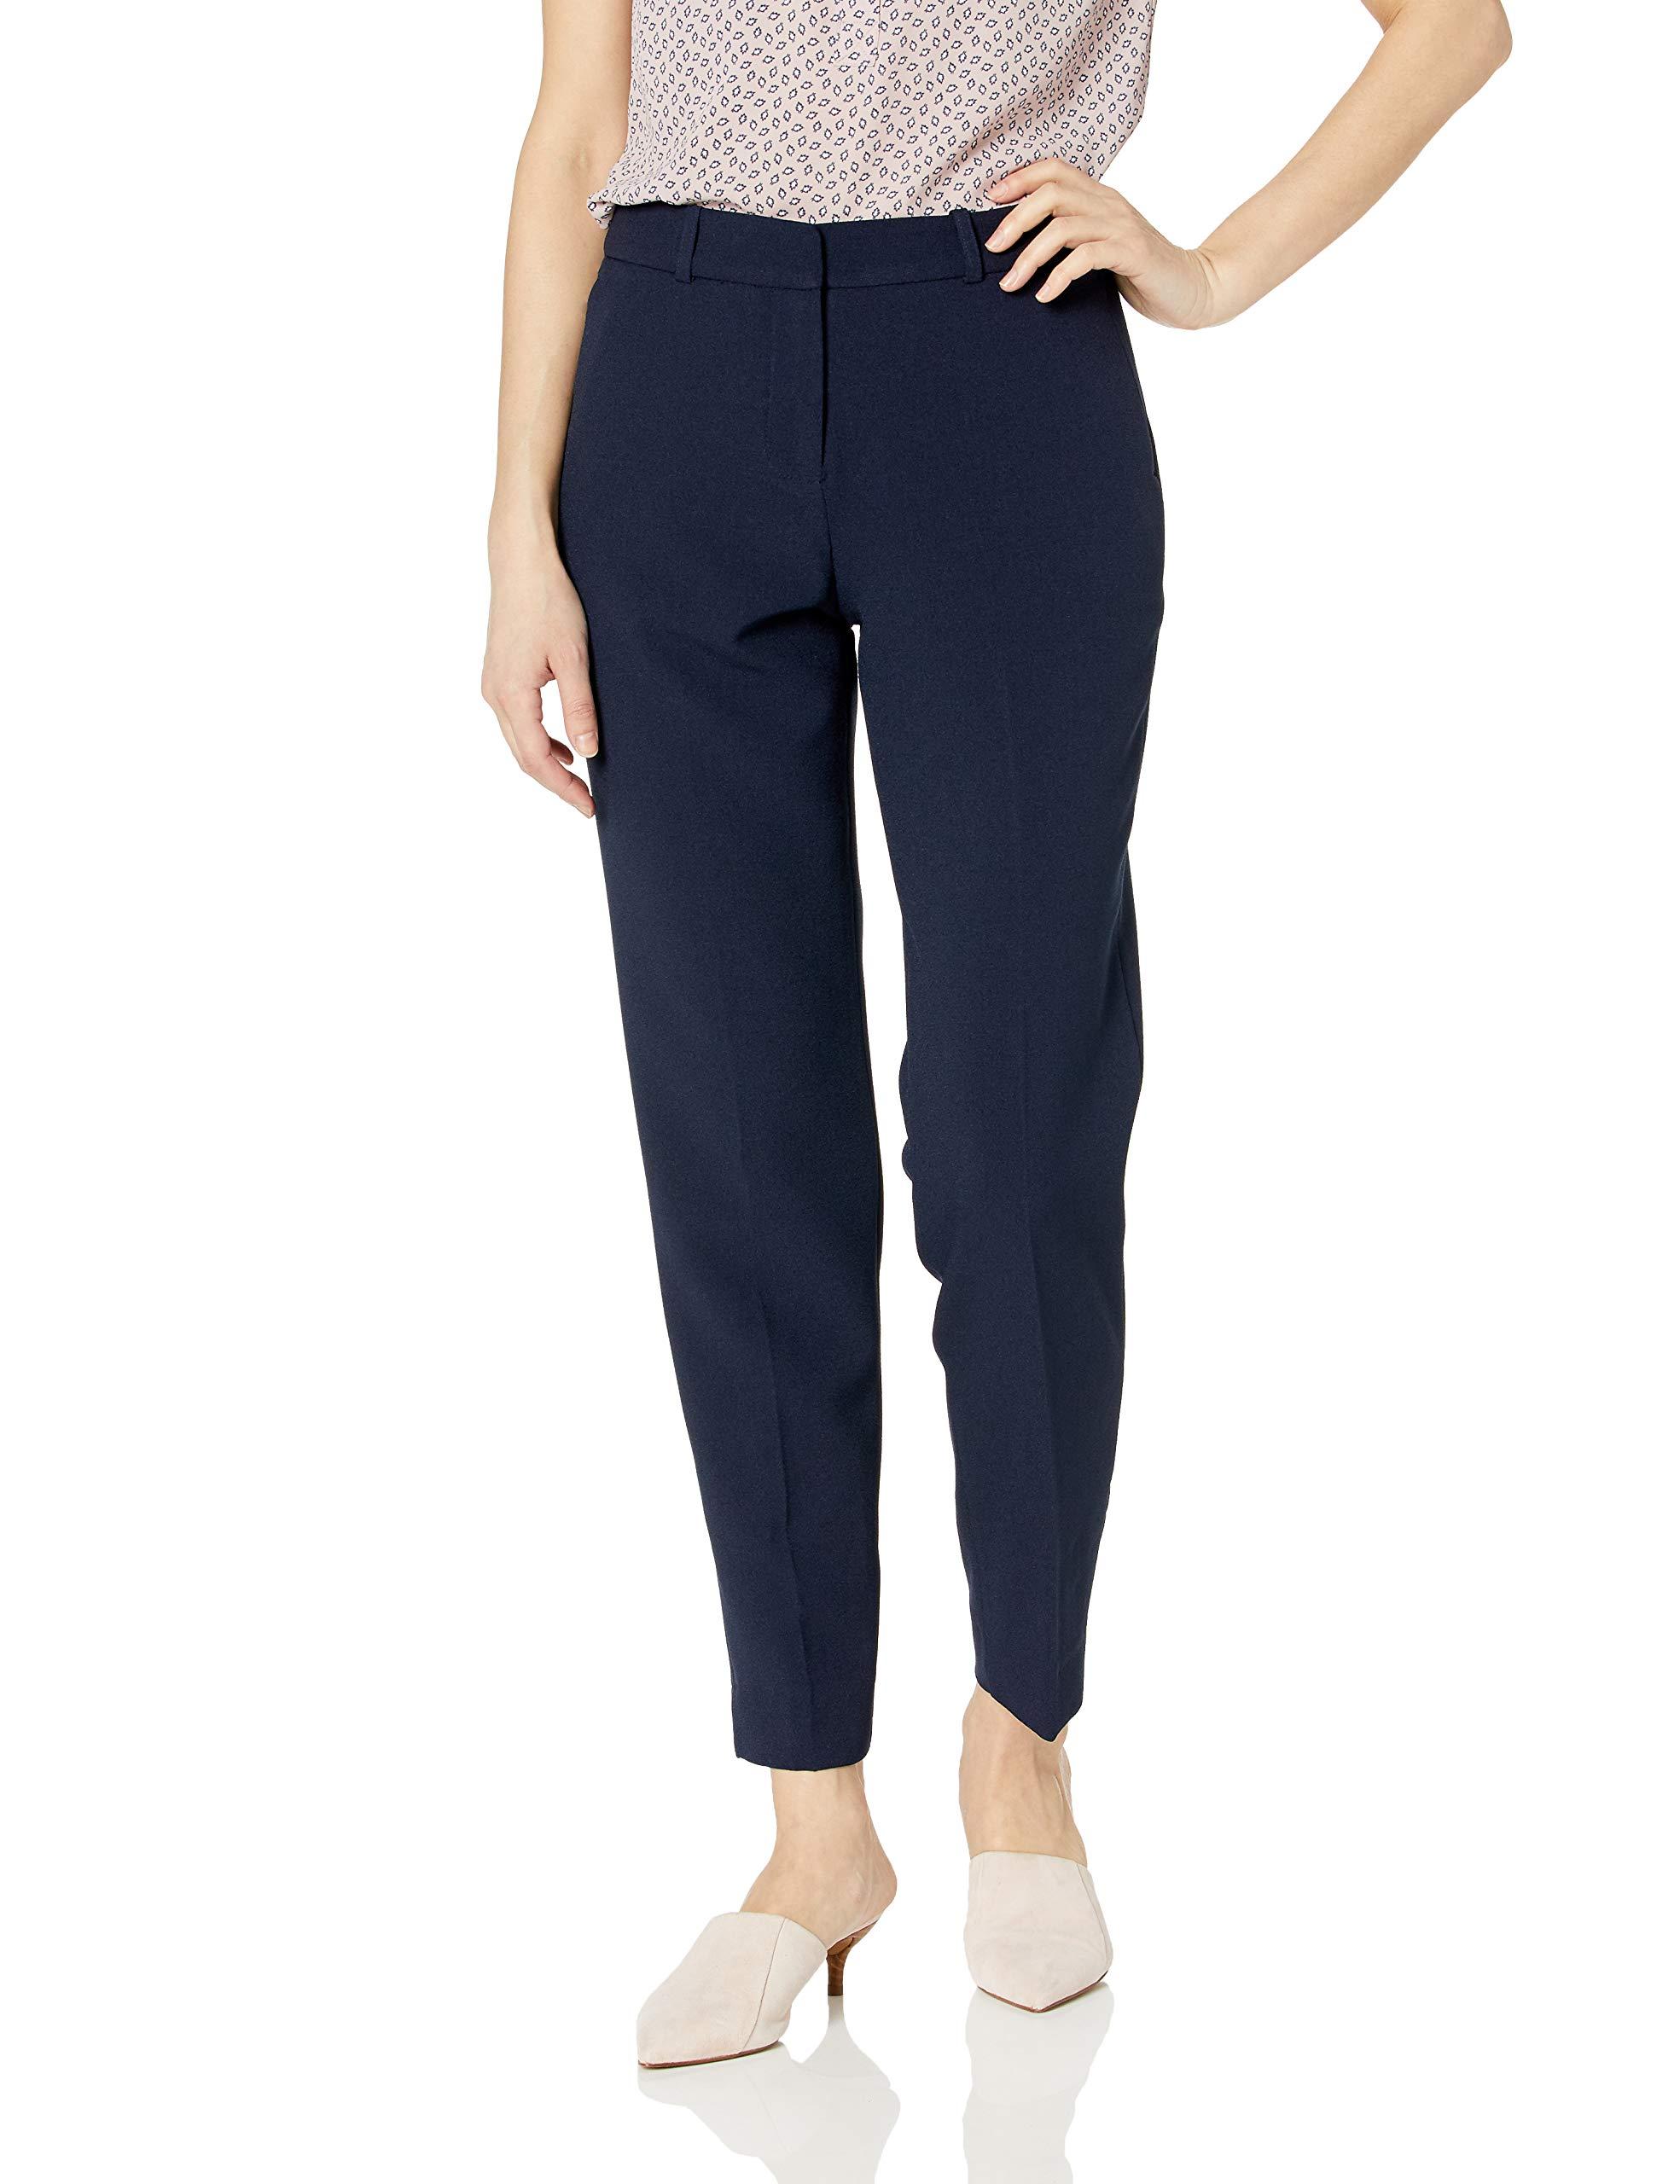 Tahari Ankle Pant With Bottom Slit in Navy (Blue) - Save 51% - Lyst